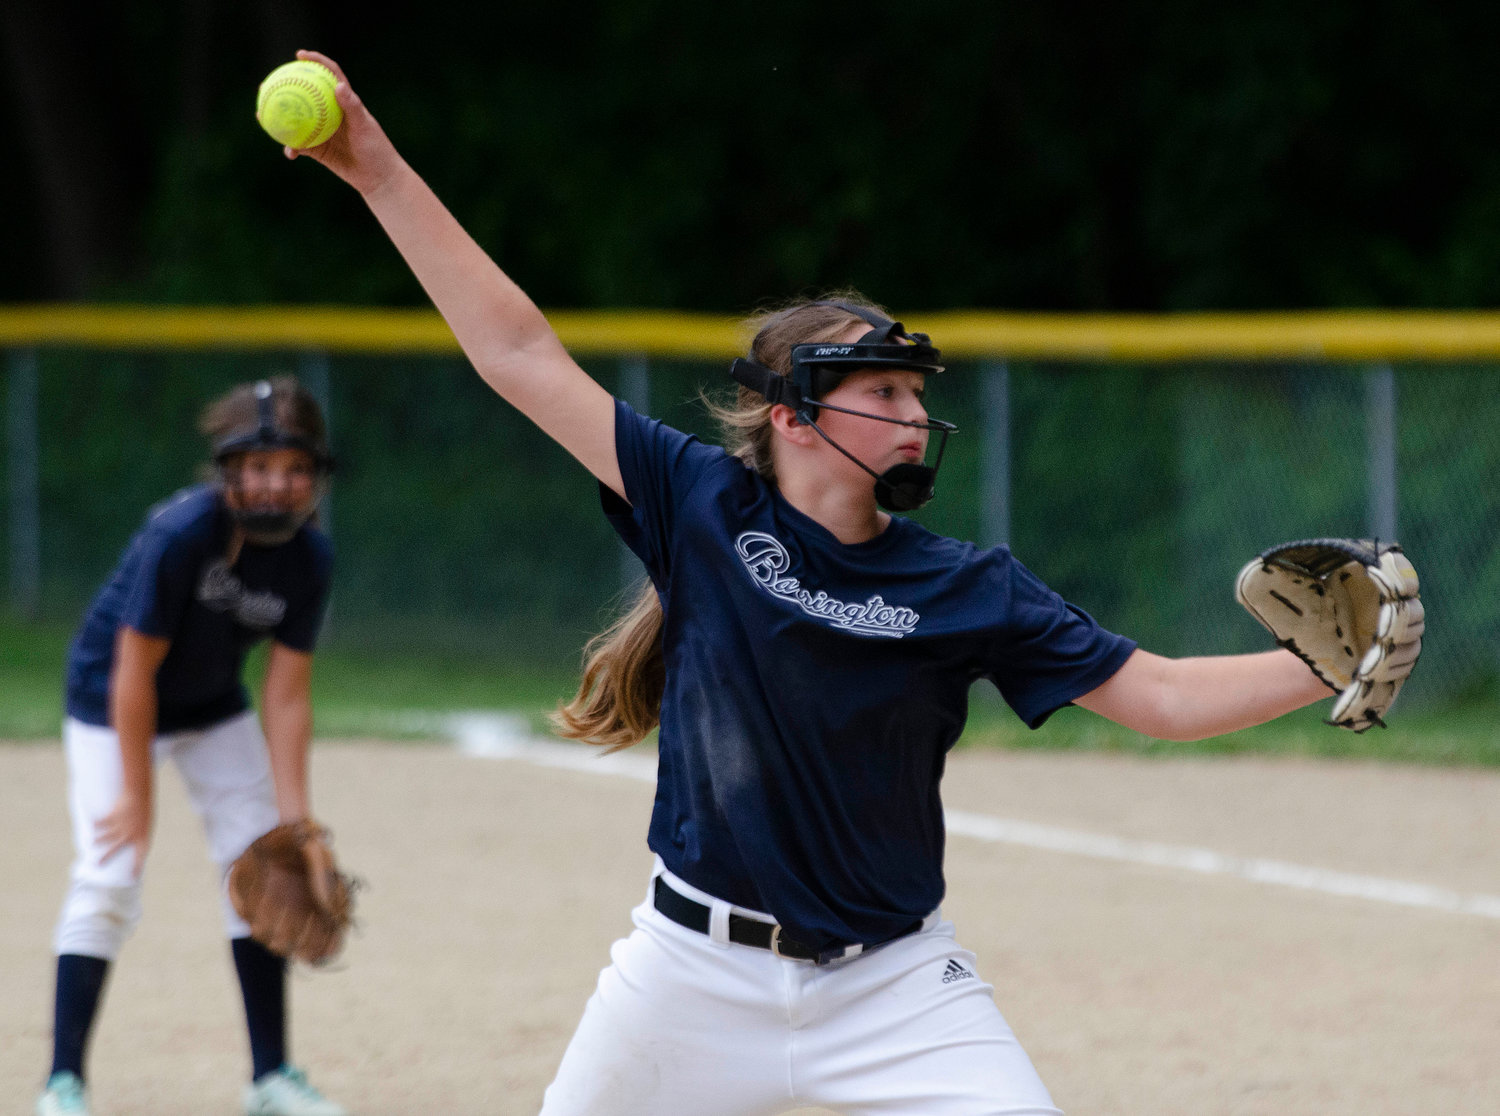 PWC pitcher Ava Lucas winds up before throwing a strike during the Barrington Little League softball minors division championship game.